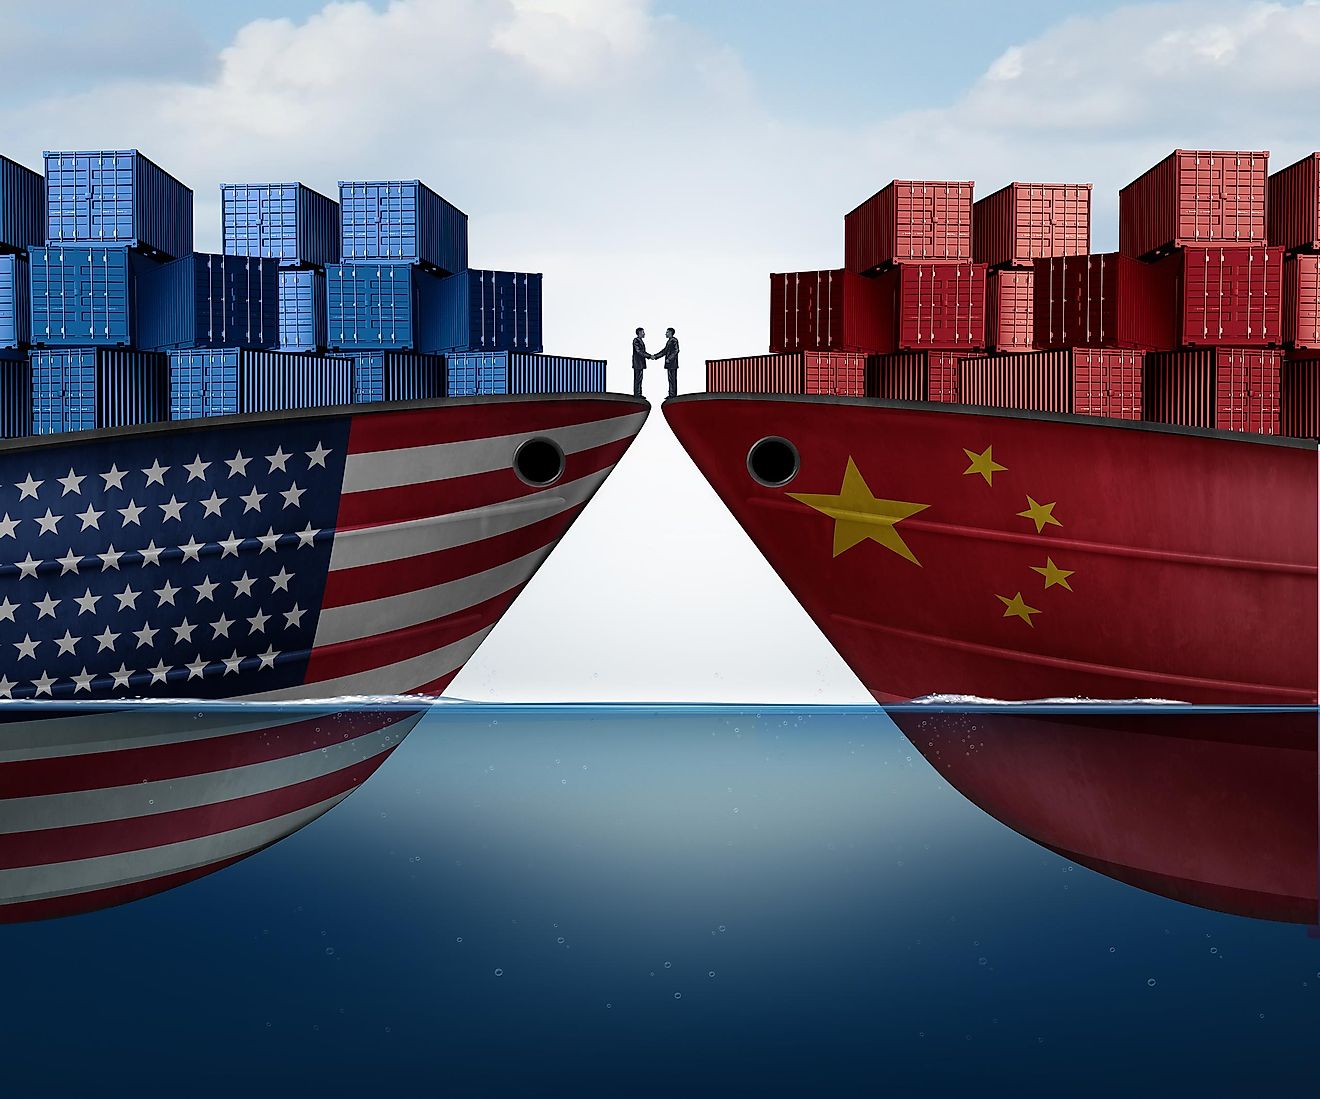 The largest trading partners of the United States are China, Canada, Mexico, Japan and Germany.